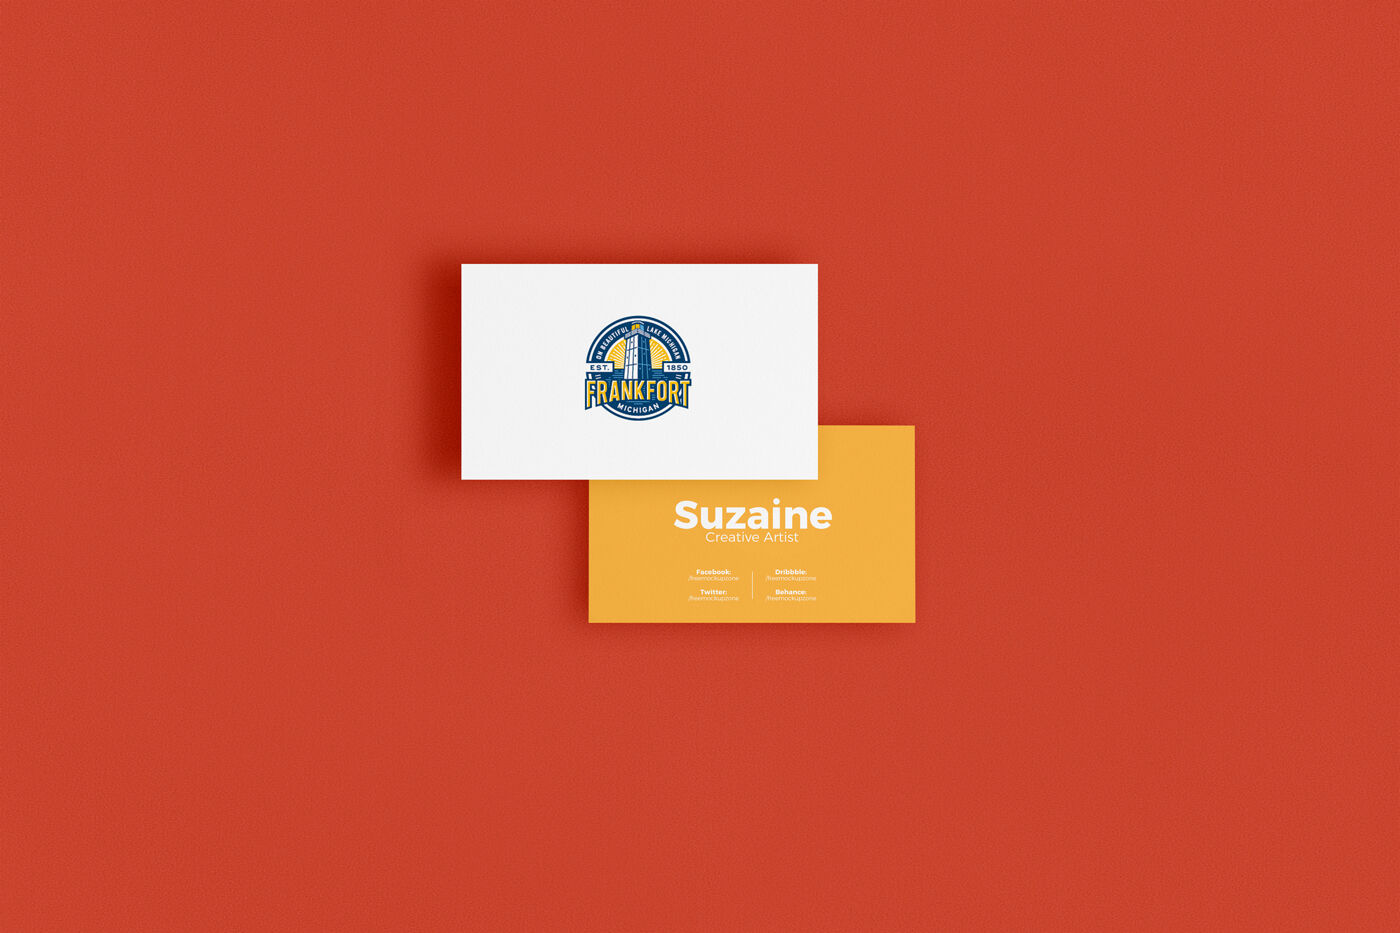 Two Overlapping Business Cards in the Center Mockup FREE PSD